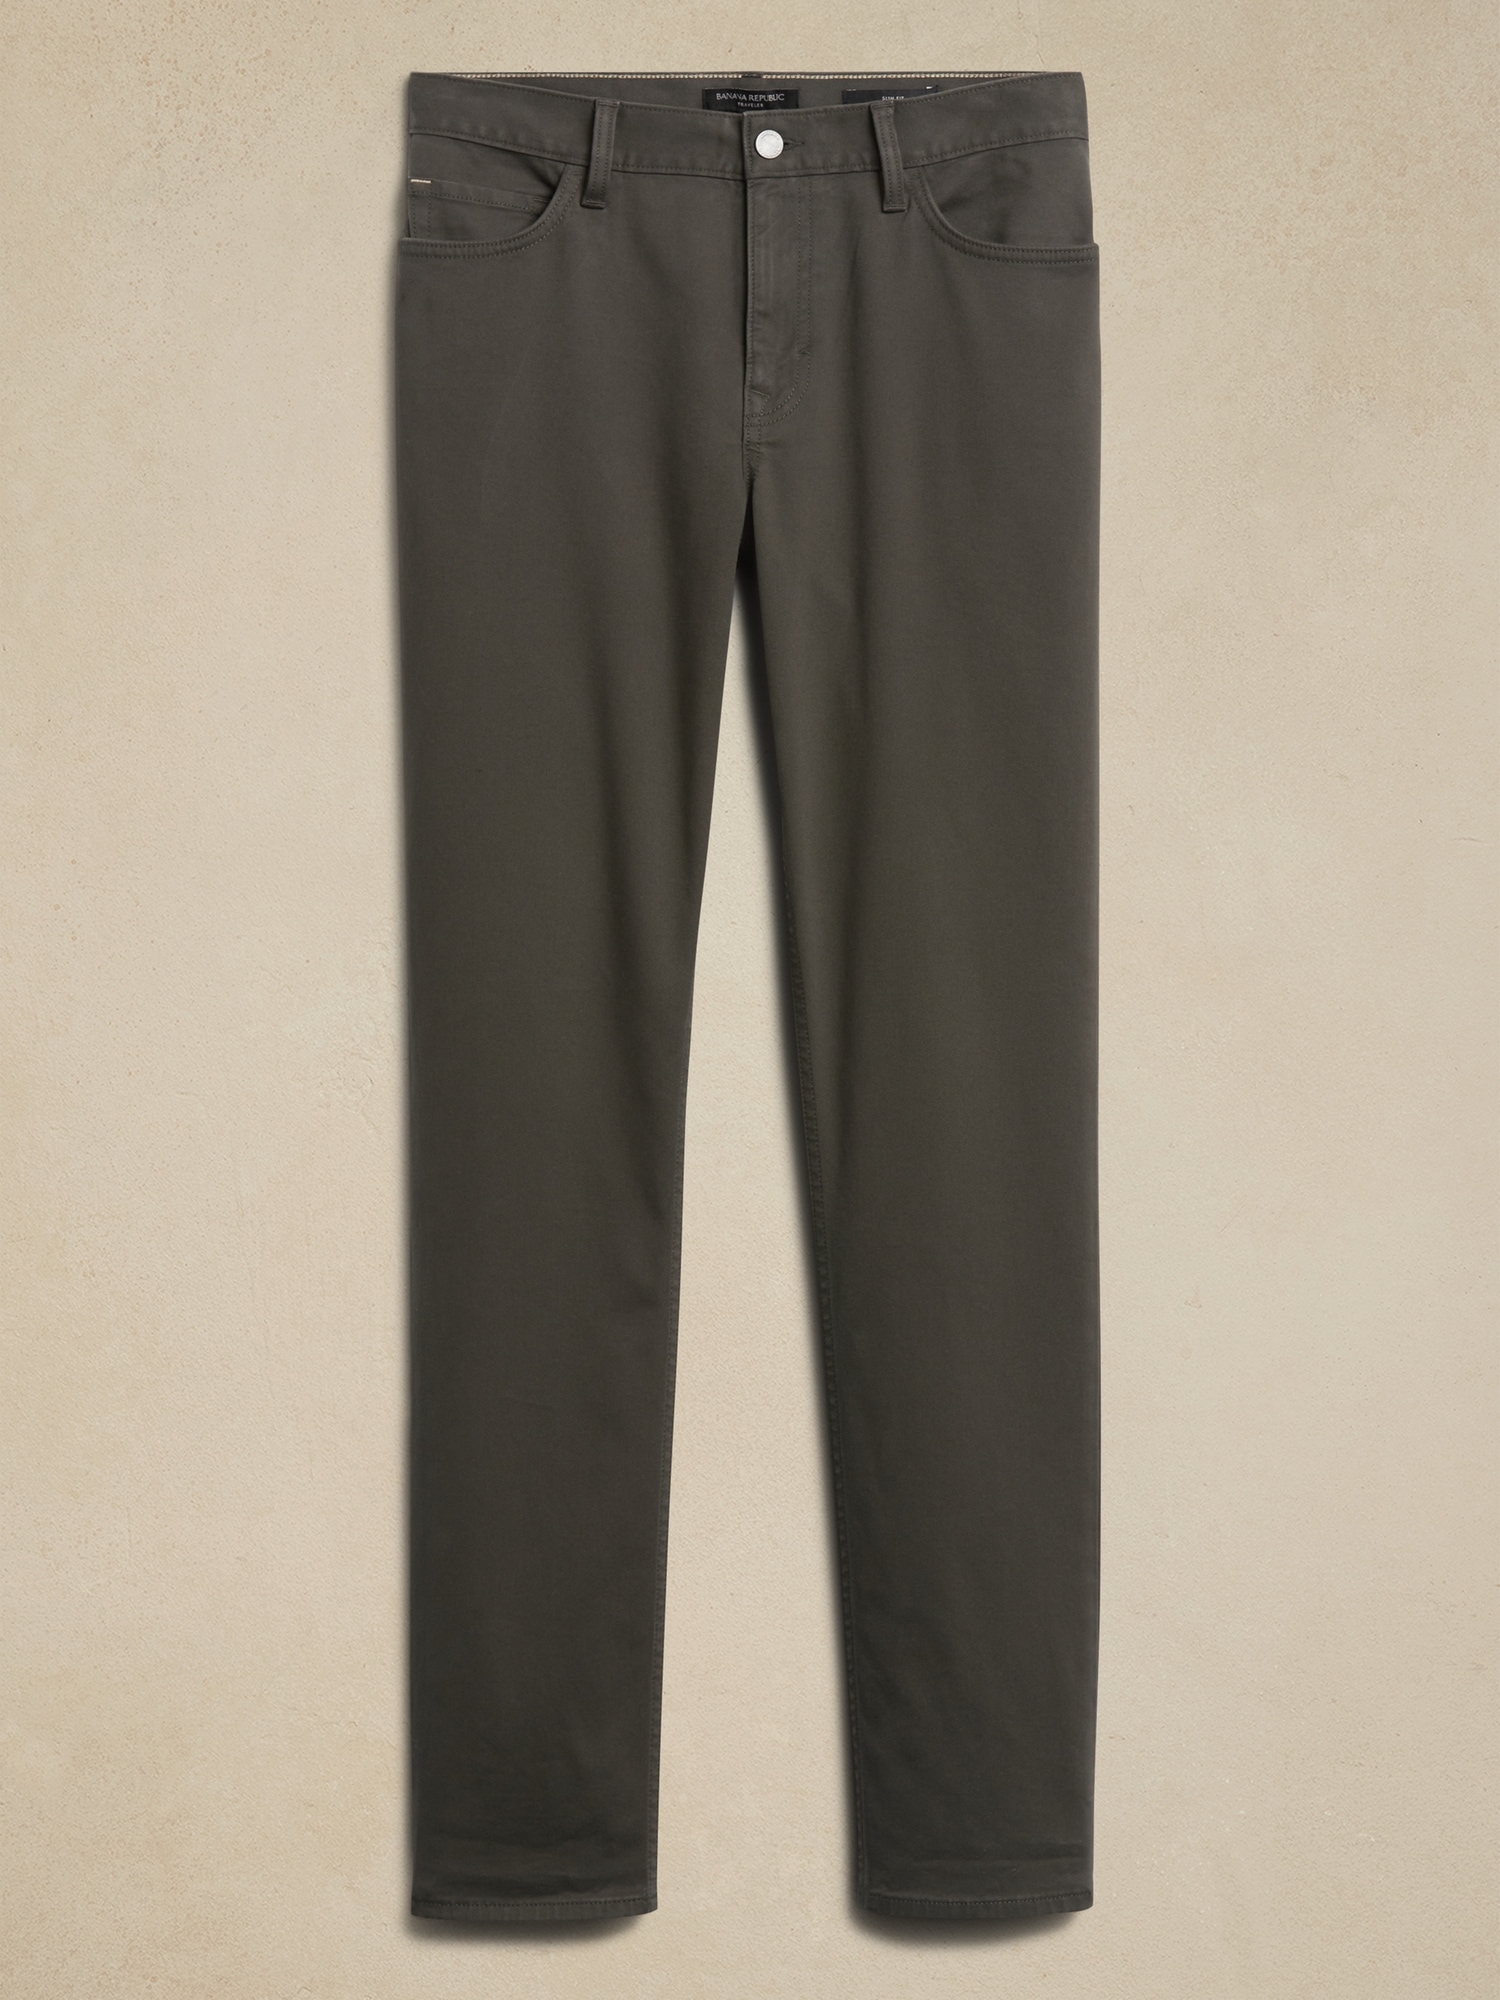 New Travellers Pants 32 x 32 from Banana republic - clothing